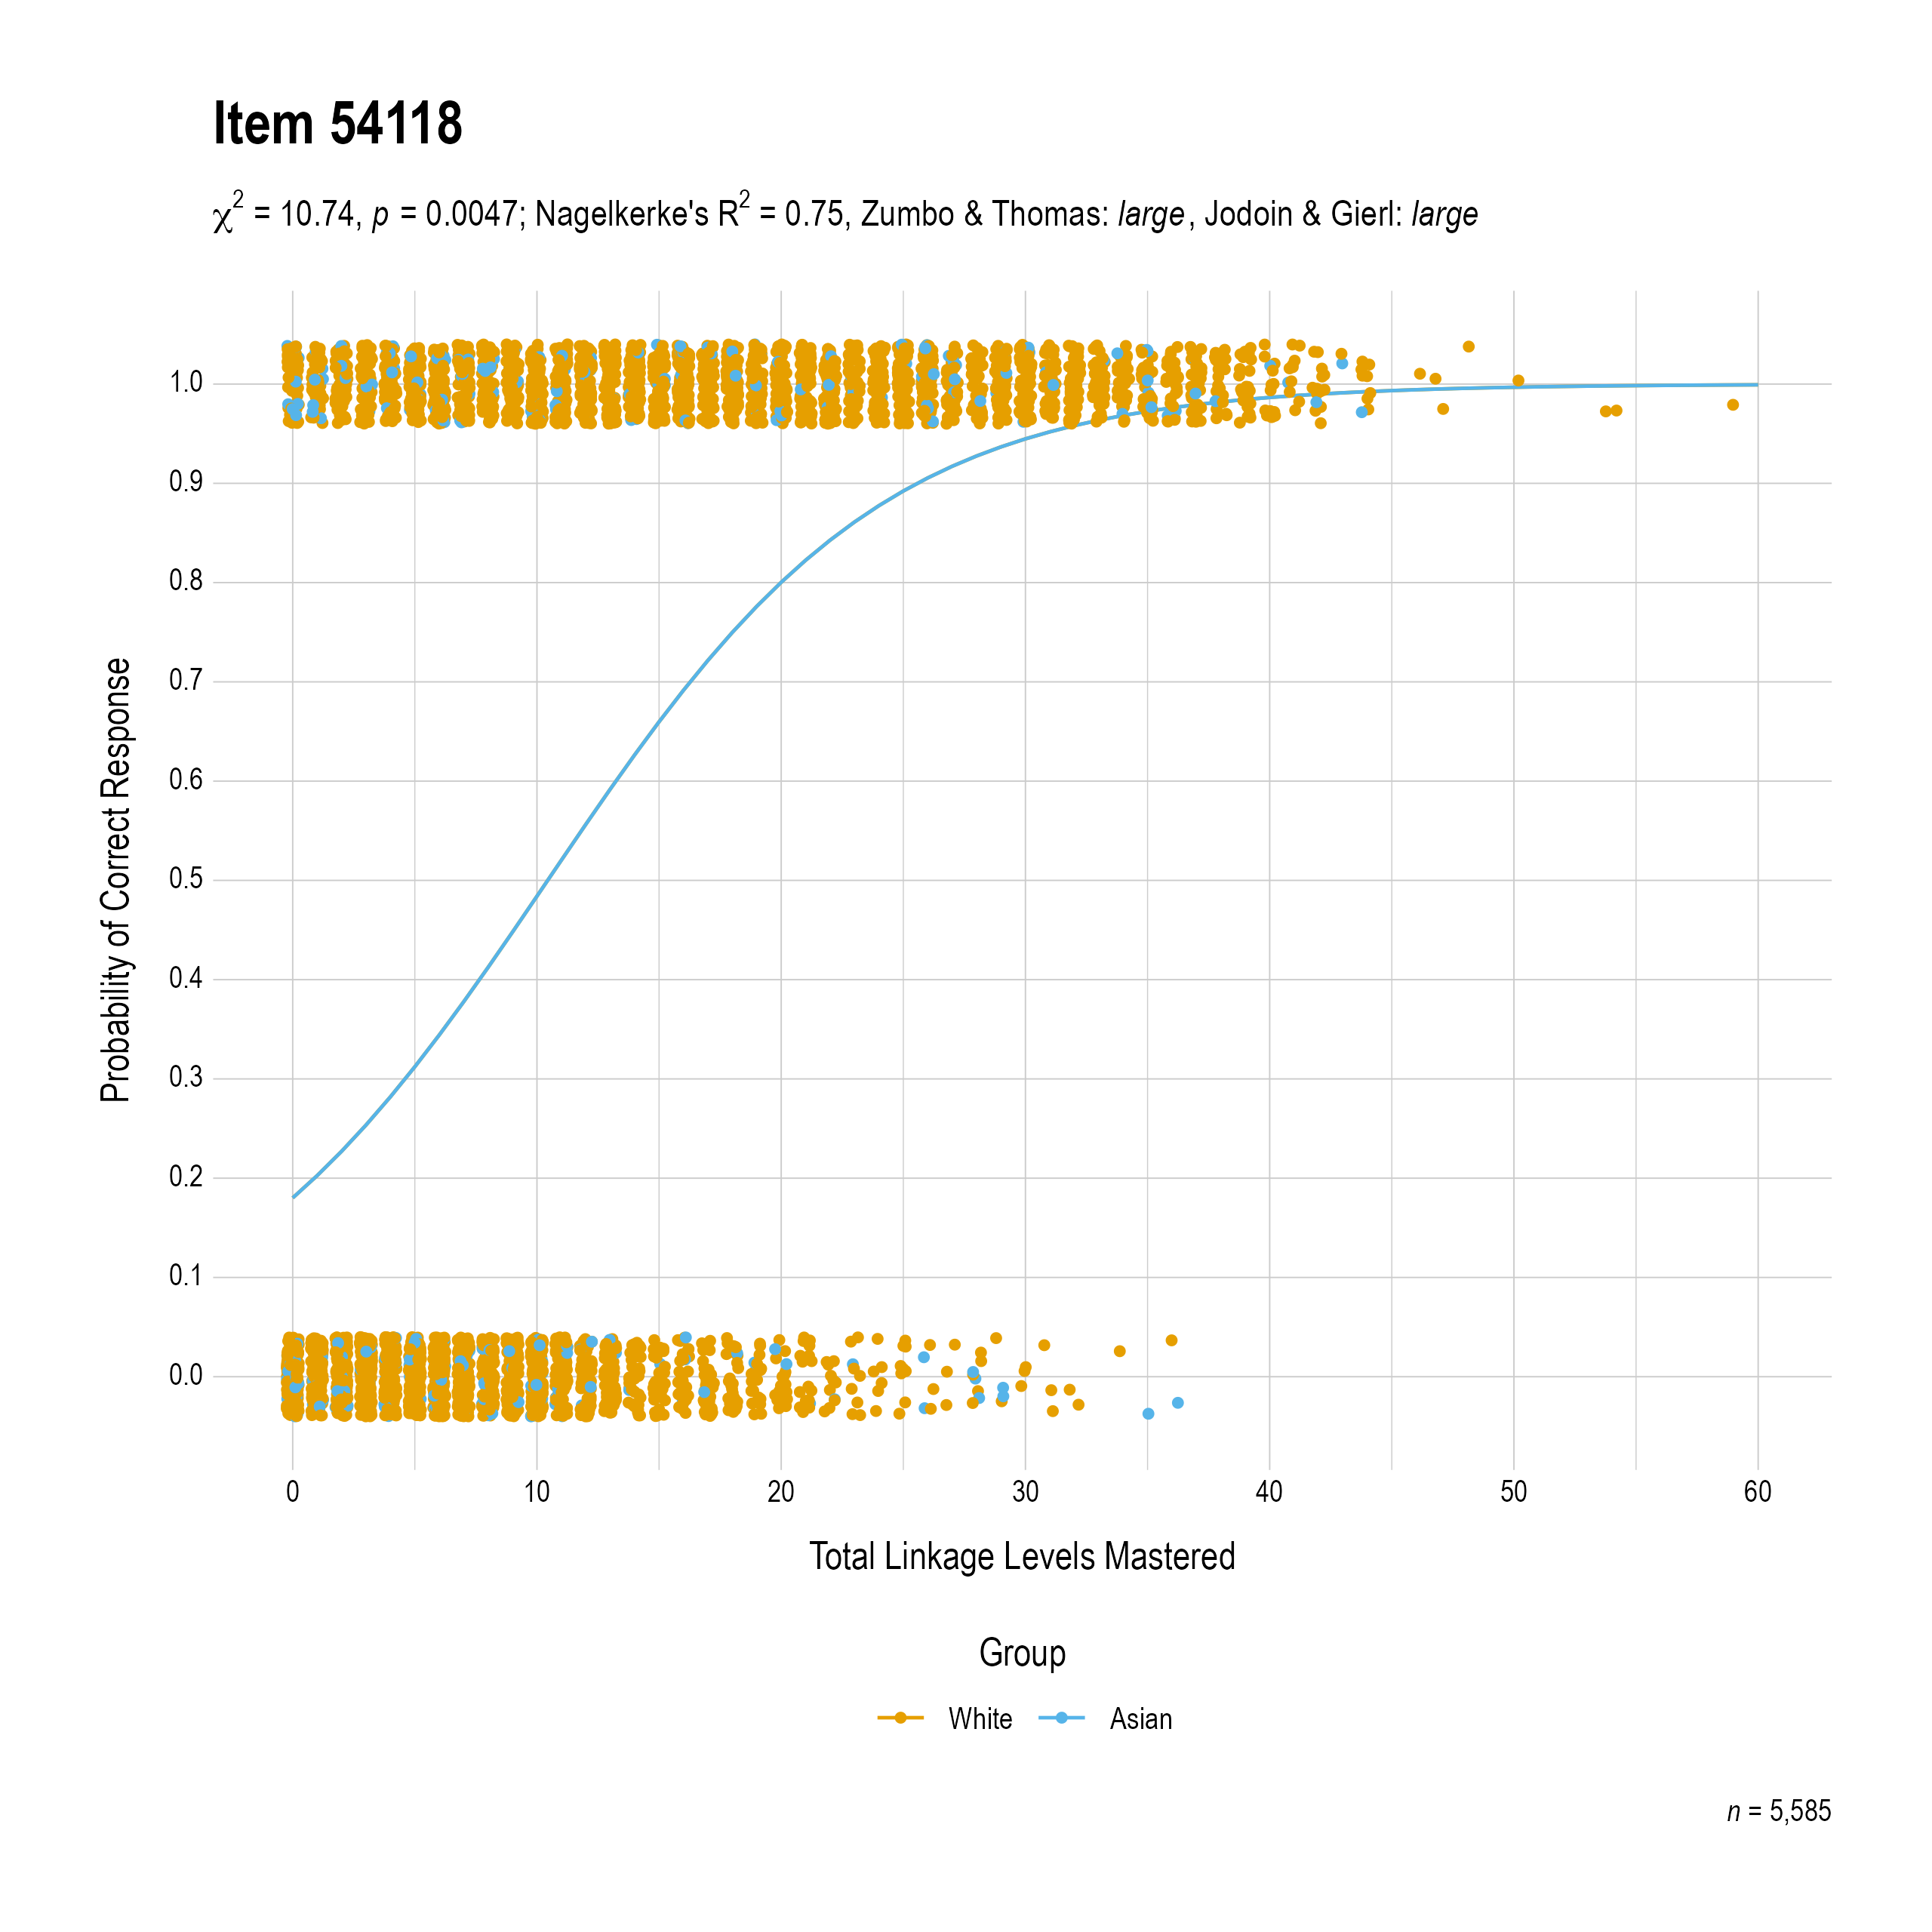 The plot of the combined race differential item function evidence for English language arts item 54118. The figure contains points shaded by group. The figure also contains a logistic regression curve for each group. The total linkage levels mastered in is on the x-axis, and the probability of a correct response is on the y-axis.